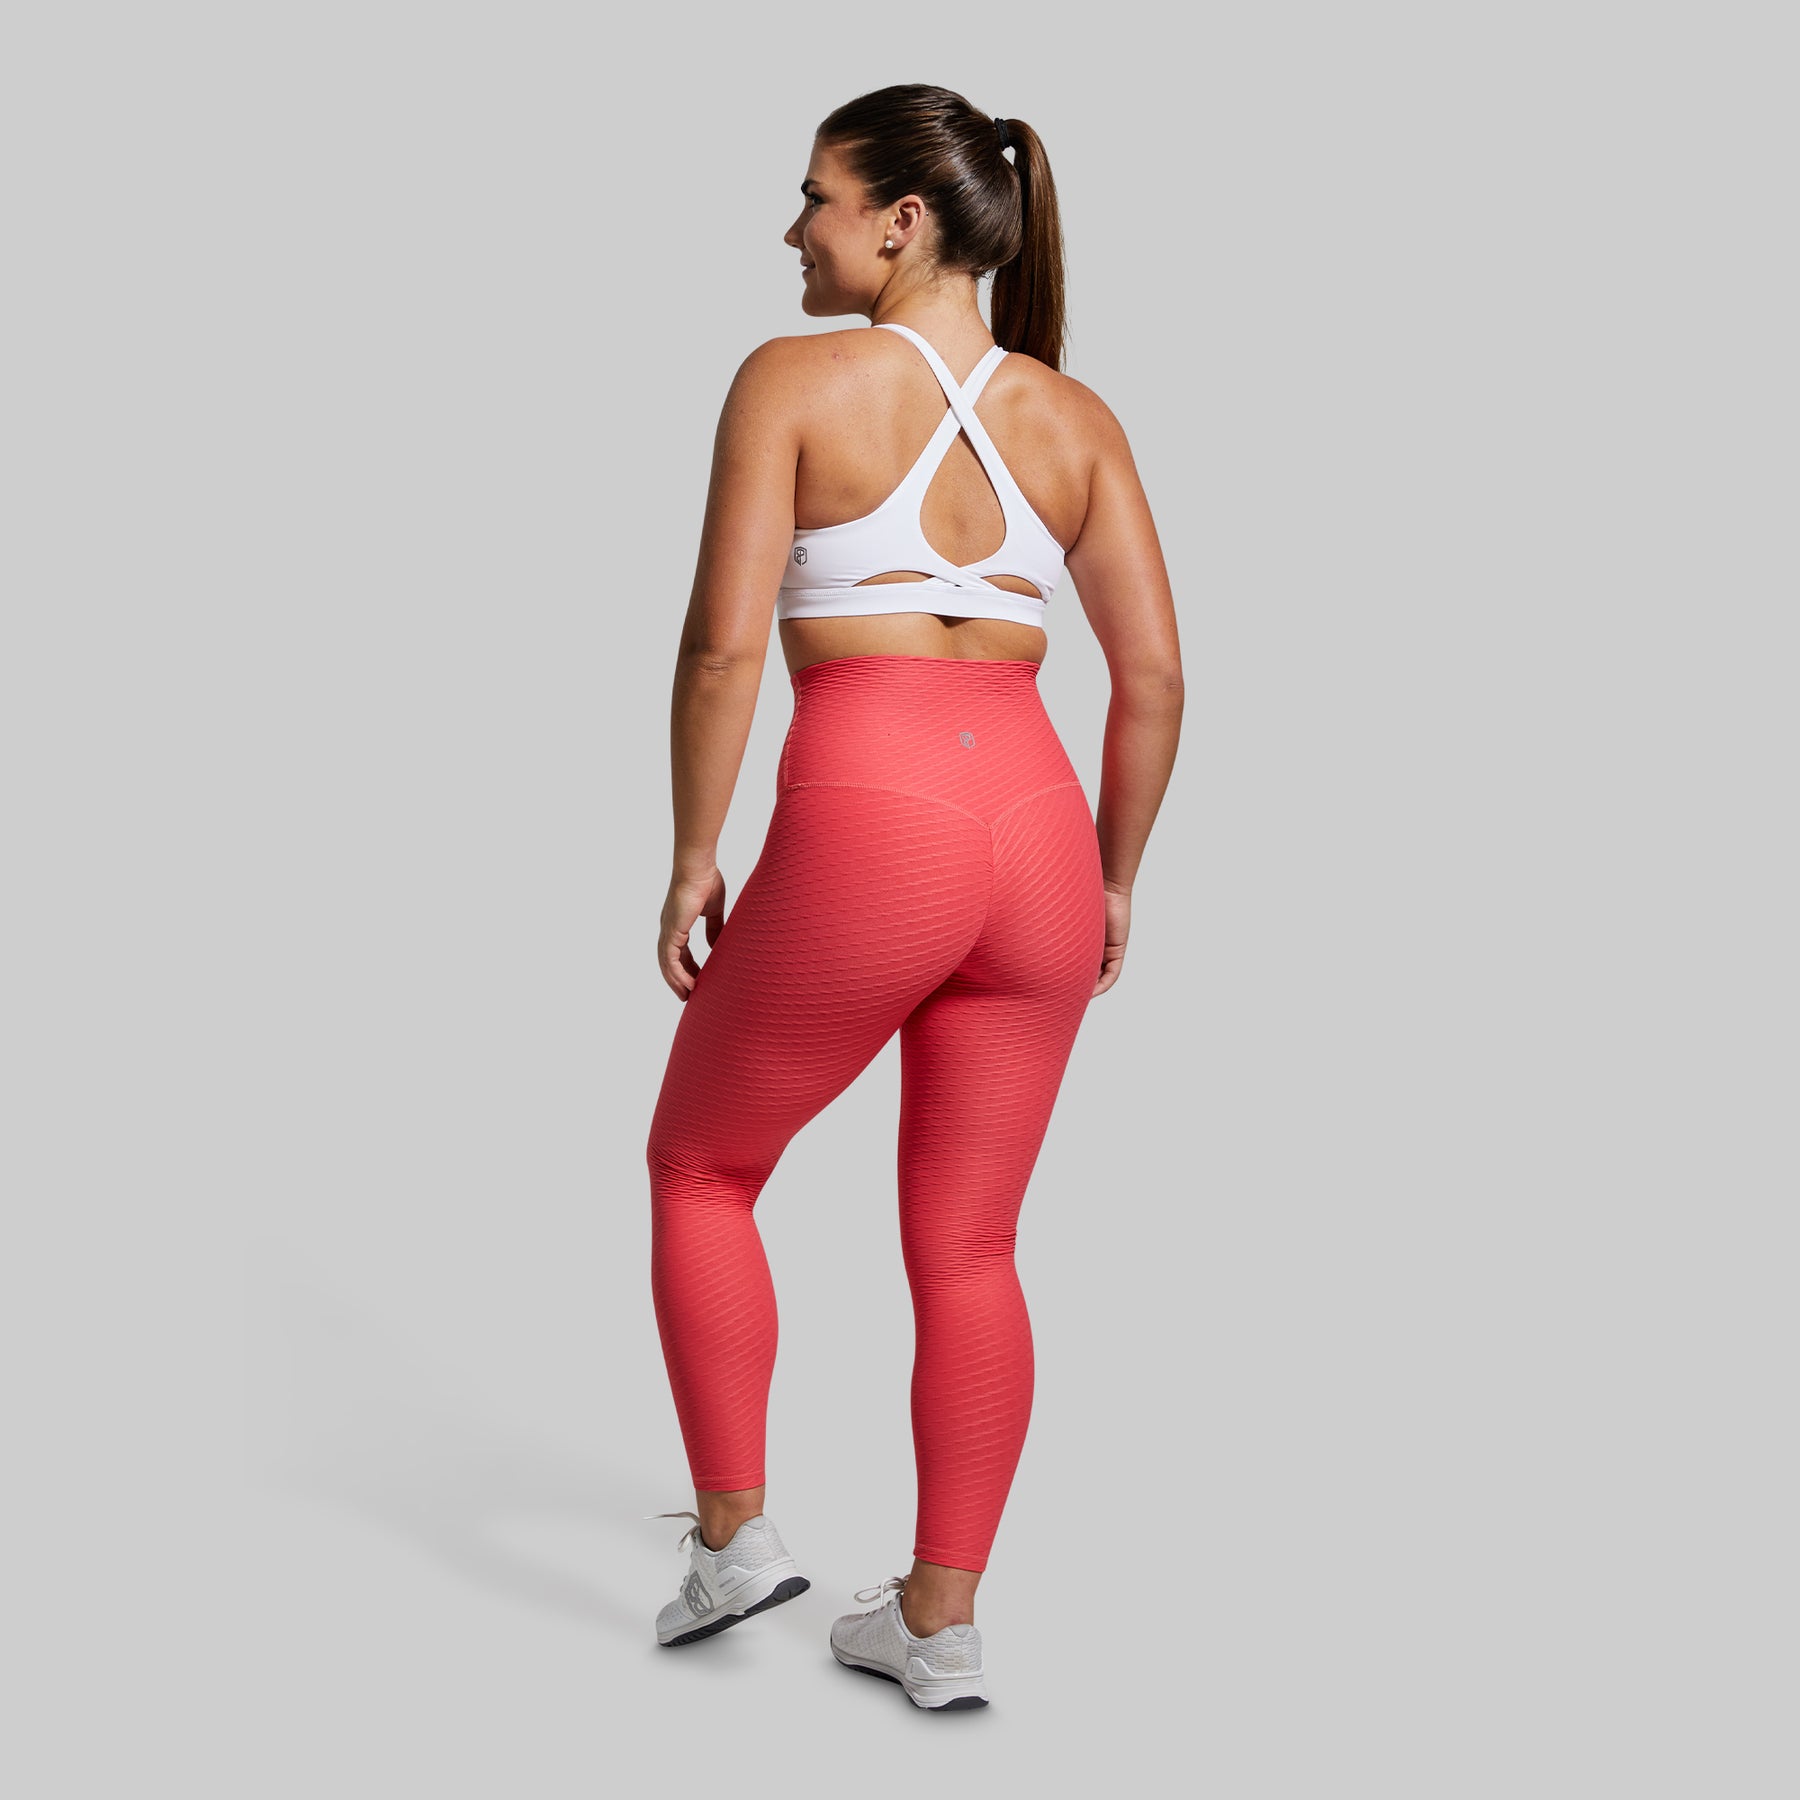 BornPrimitive on X: Leggings that embody excellence? We've got 'em.⁠ And  they're backed by over 1,100 5-star reviews.⁠ ⁠ Try our Paragon leggings  today to find out for yourself.⁠  / X